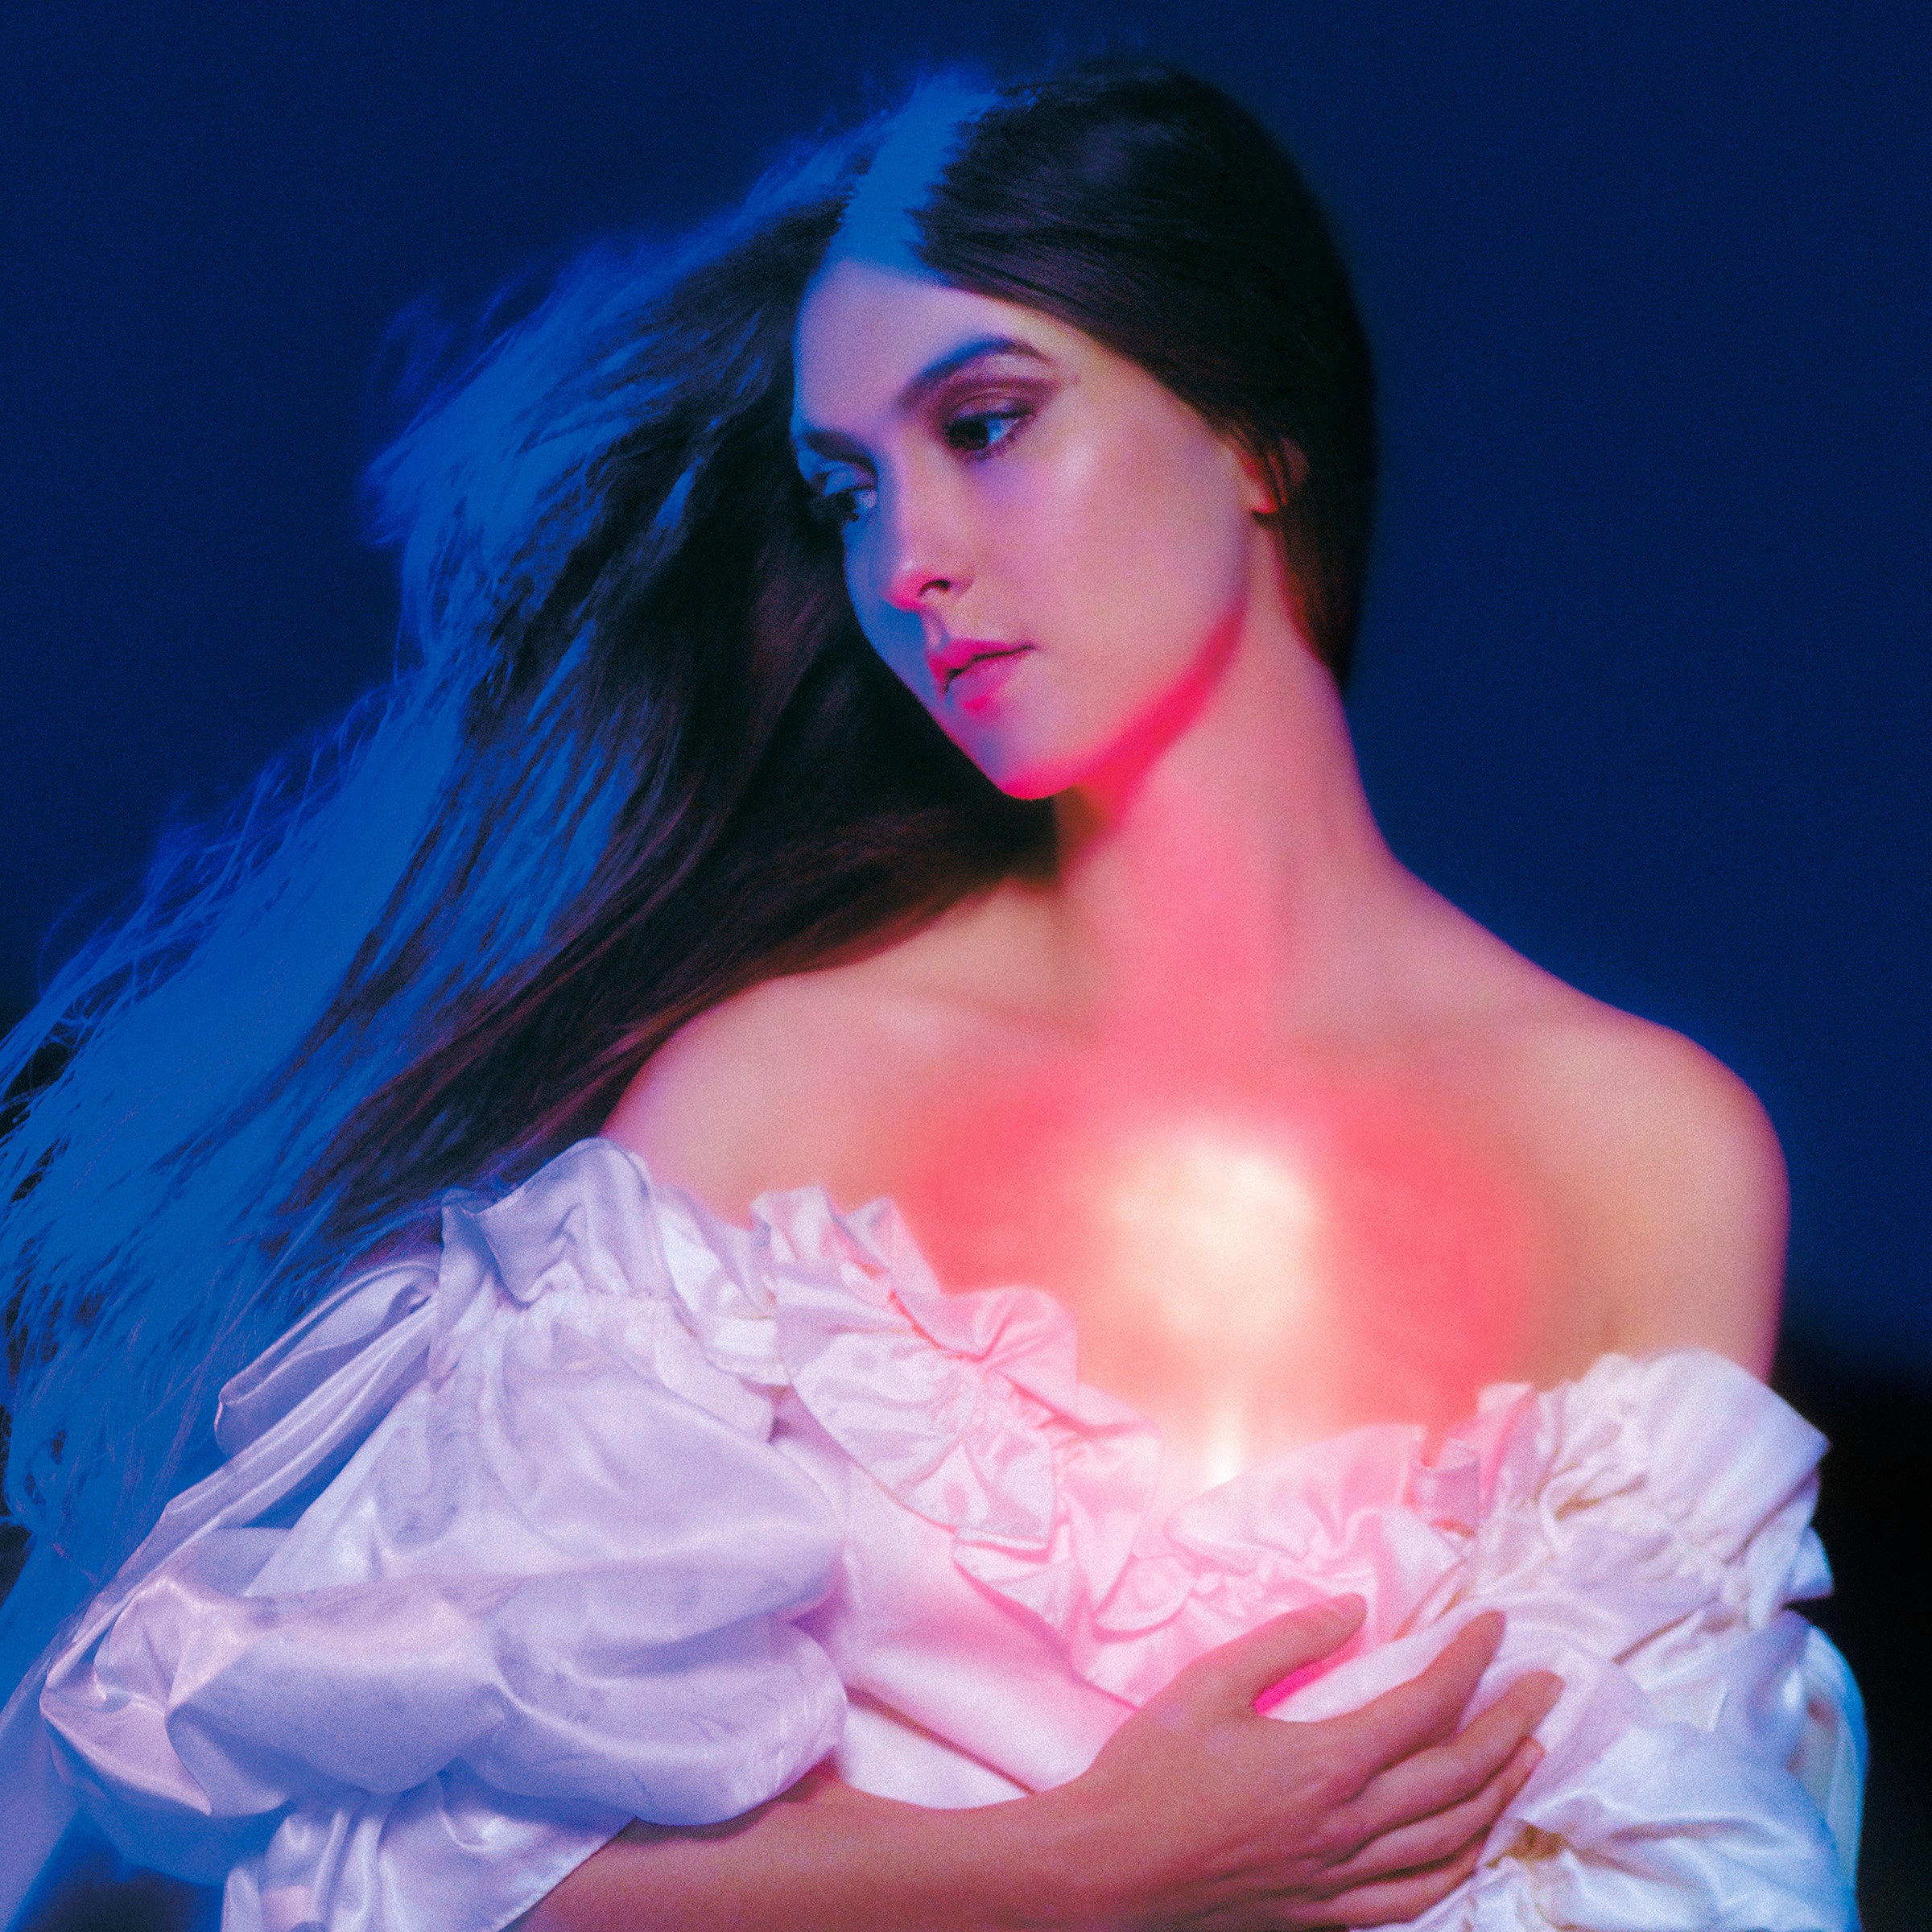 Weyes Blood And In The Darkness, Hearts Aglow Vinyl